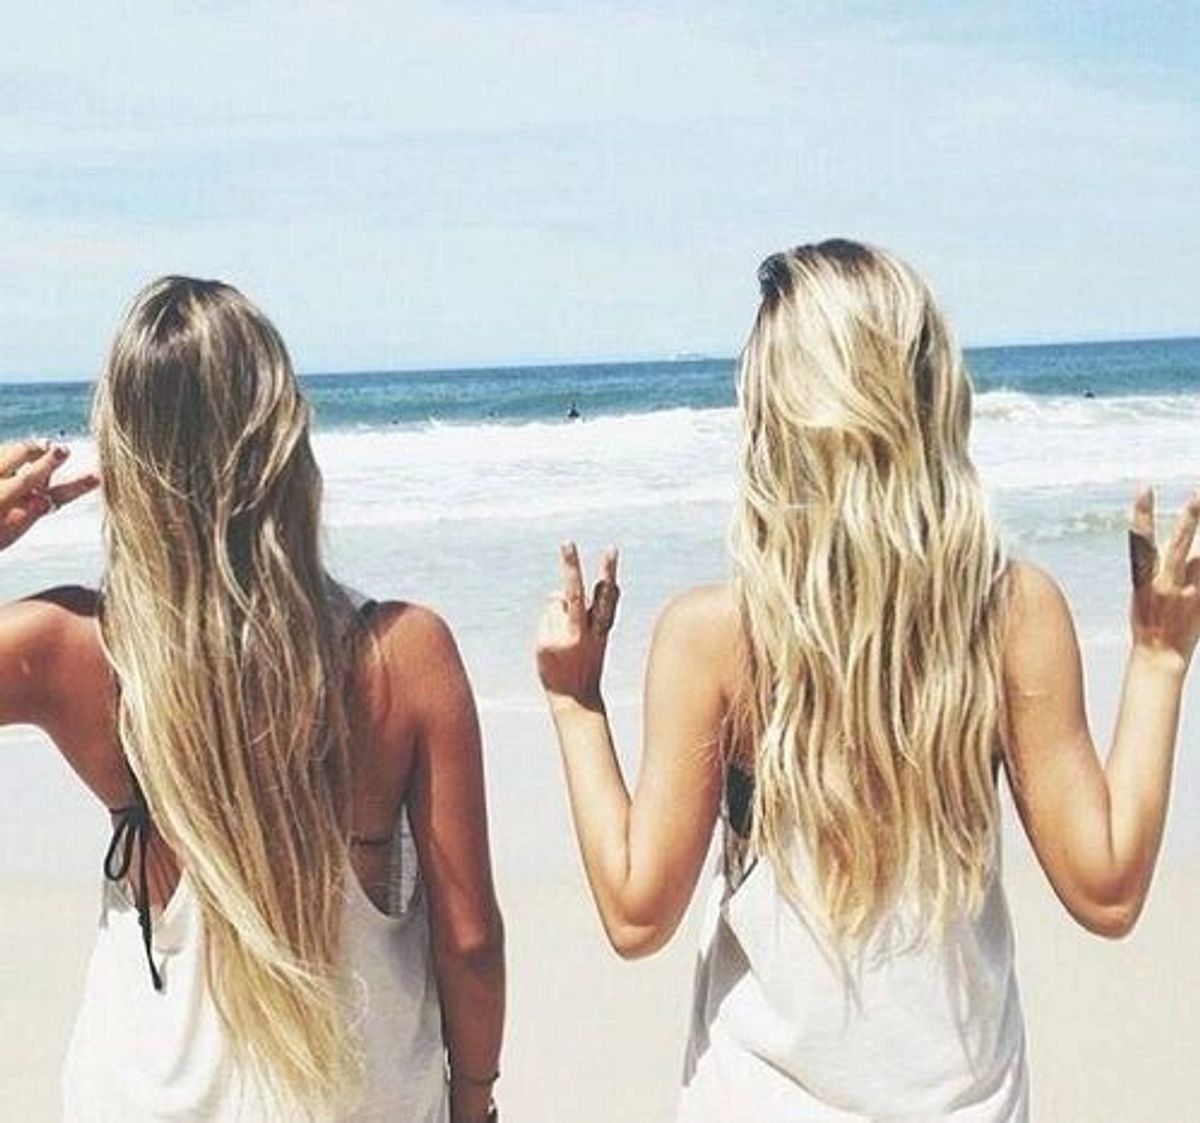 16 Things Only Blonde Girls Can Relate To